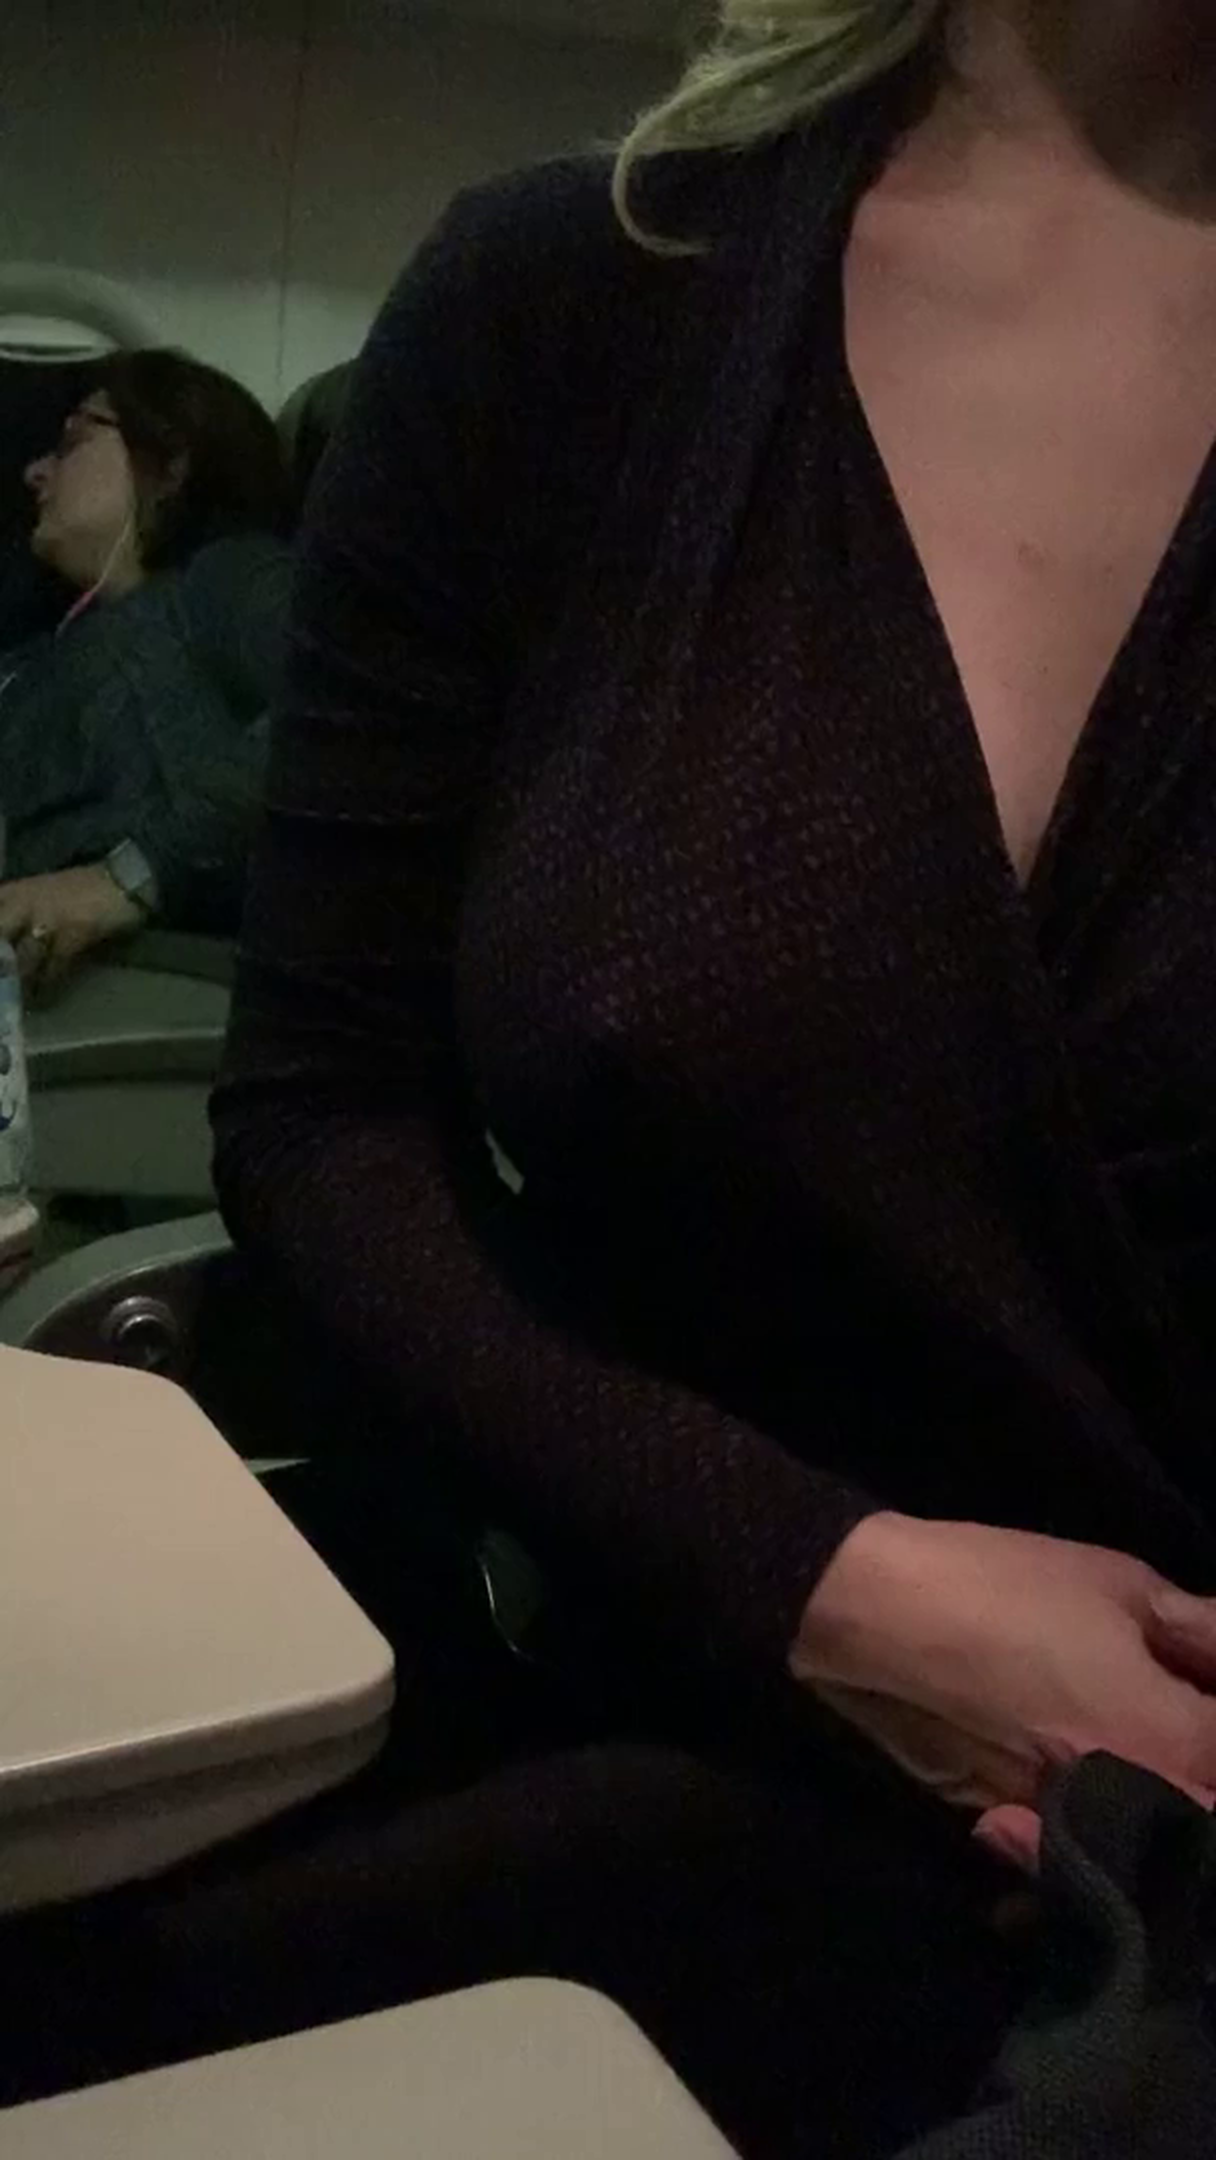 Video by FreakyGeeky with the username @FreakyGeeky,  December 2, 2020 at 12:58 PM. The post is about the topic Public and daring and the text says '#flash #airplane #public #nipple #blondie'